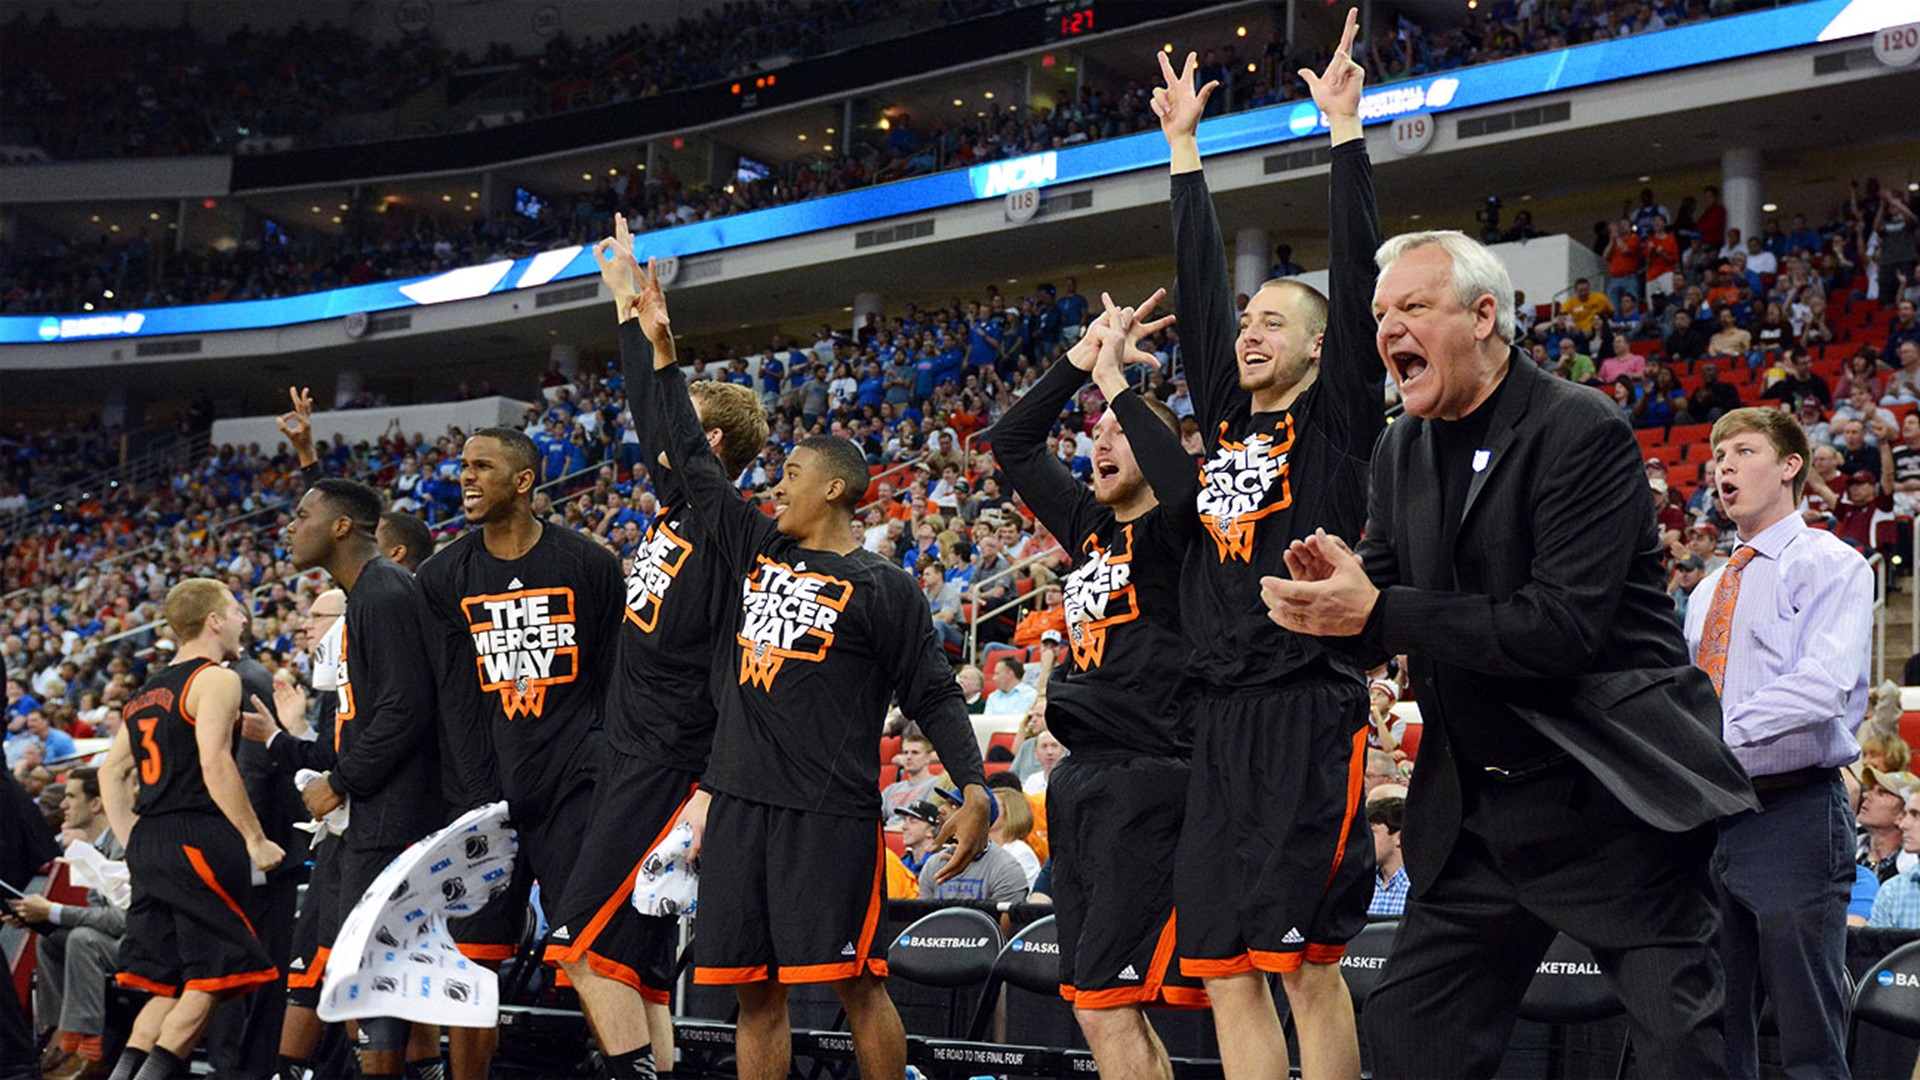 Even to this day, Mercer's beating Duke a decade ago is one of the biggest Cinderella stories in college basketball history.